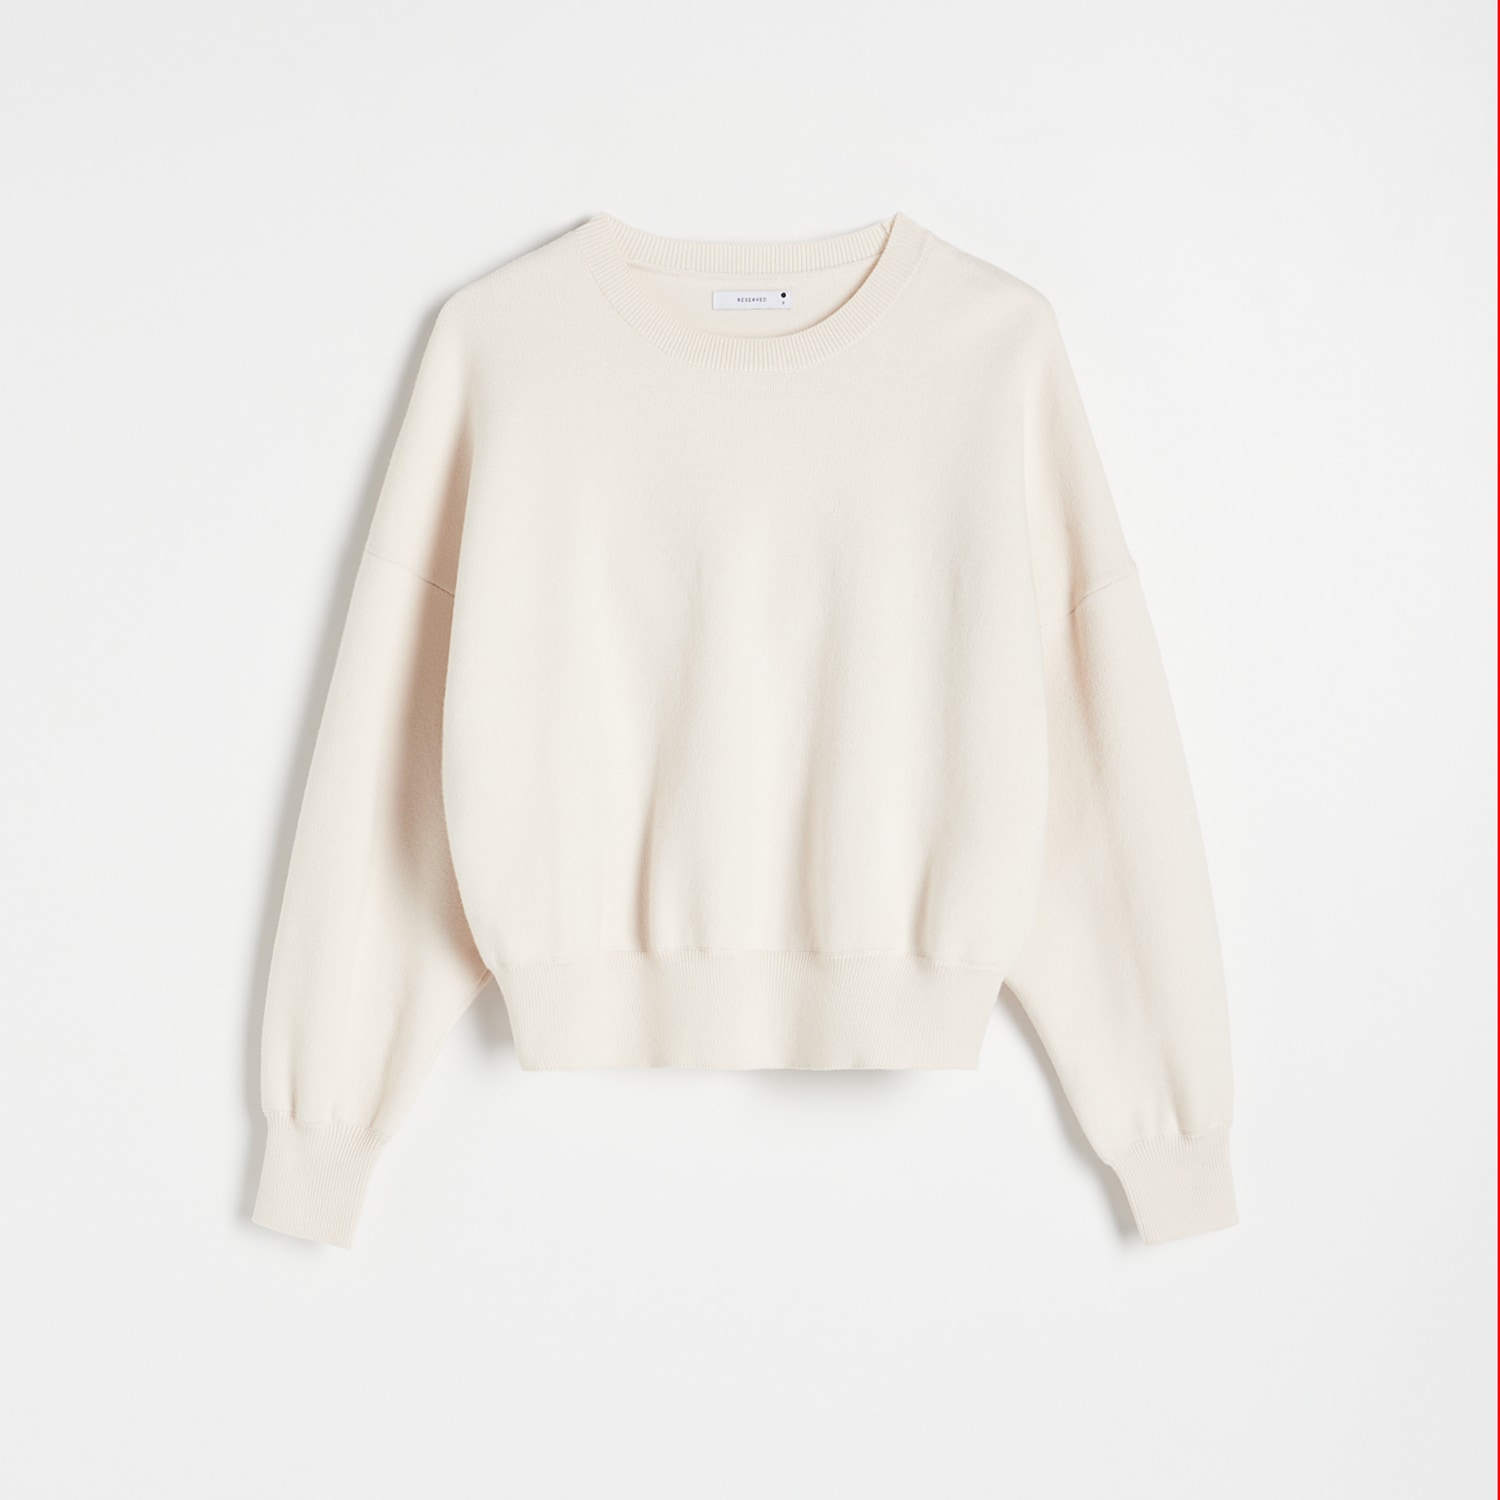 Reserved - Ladies` sweater - Ivory